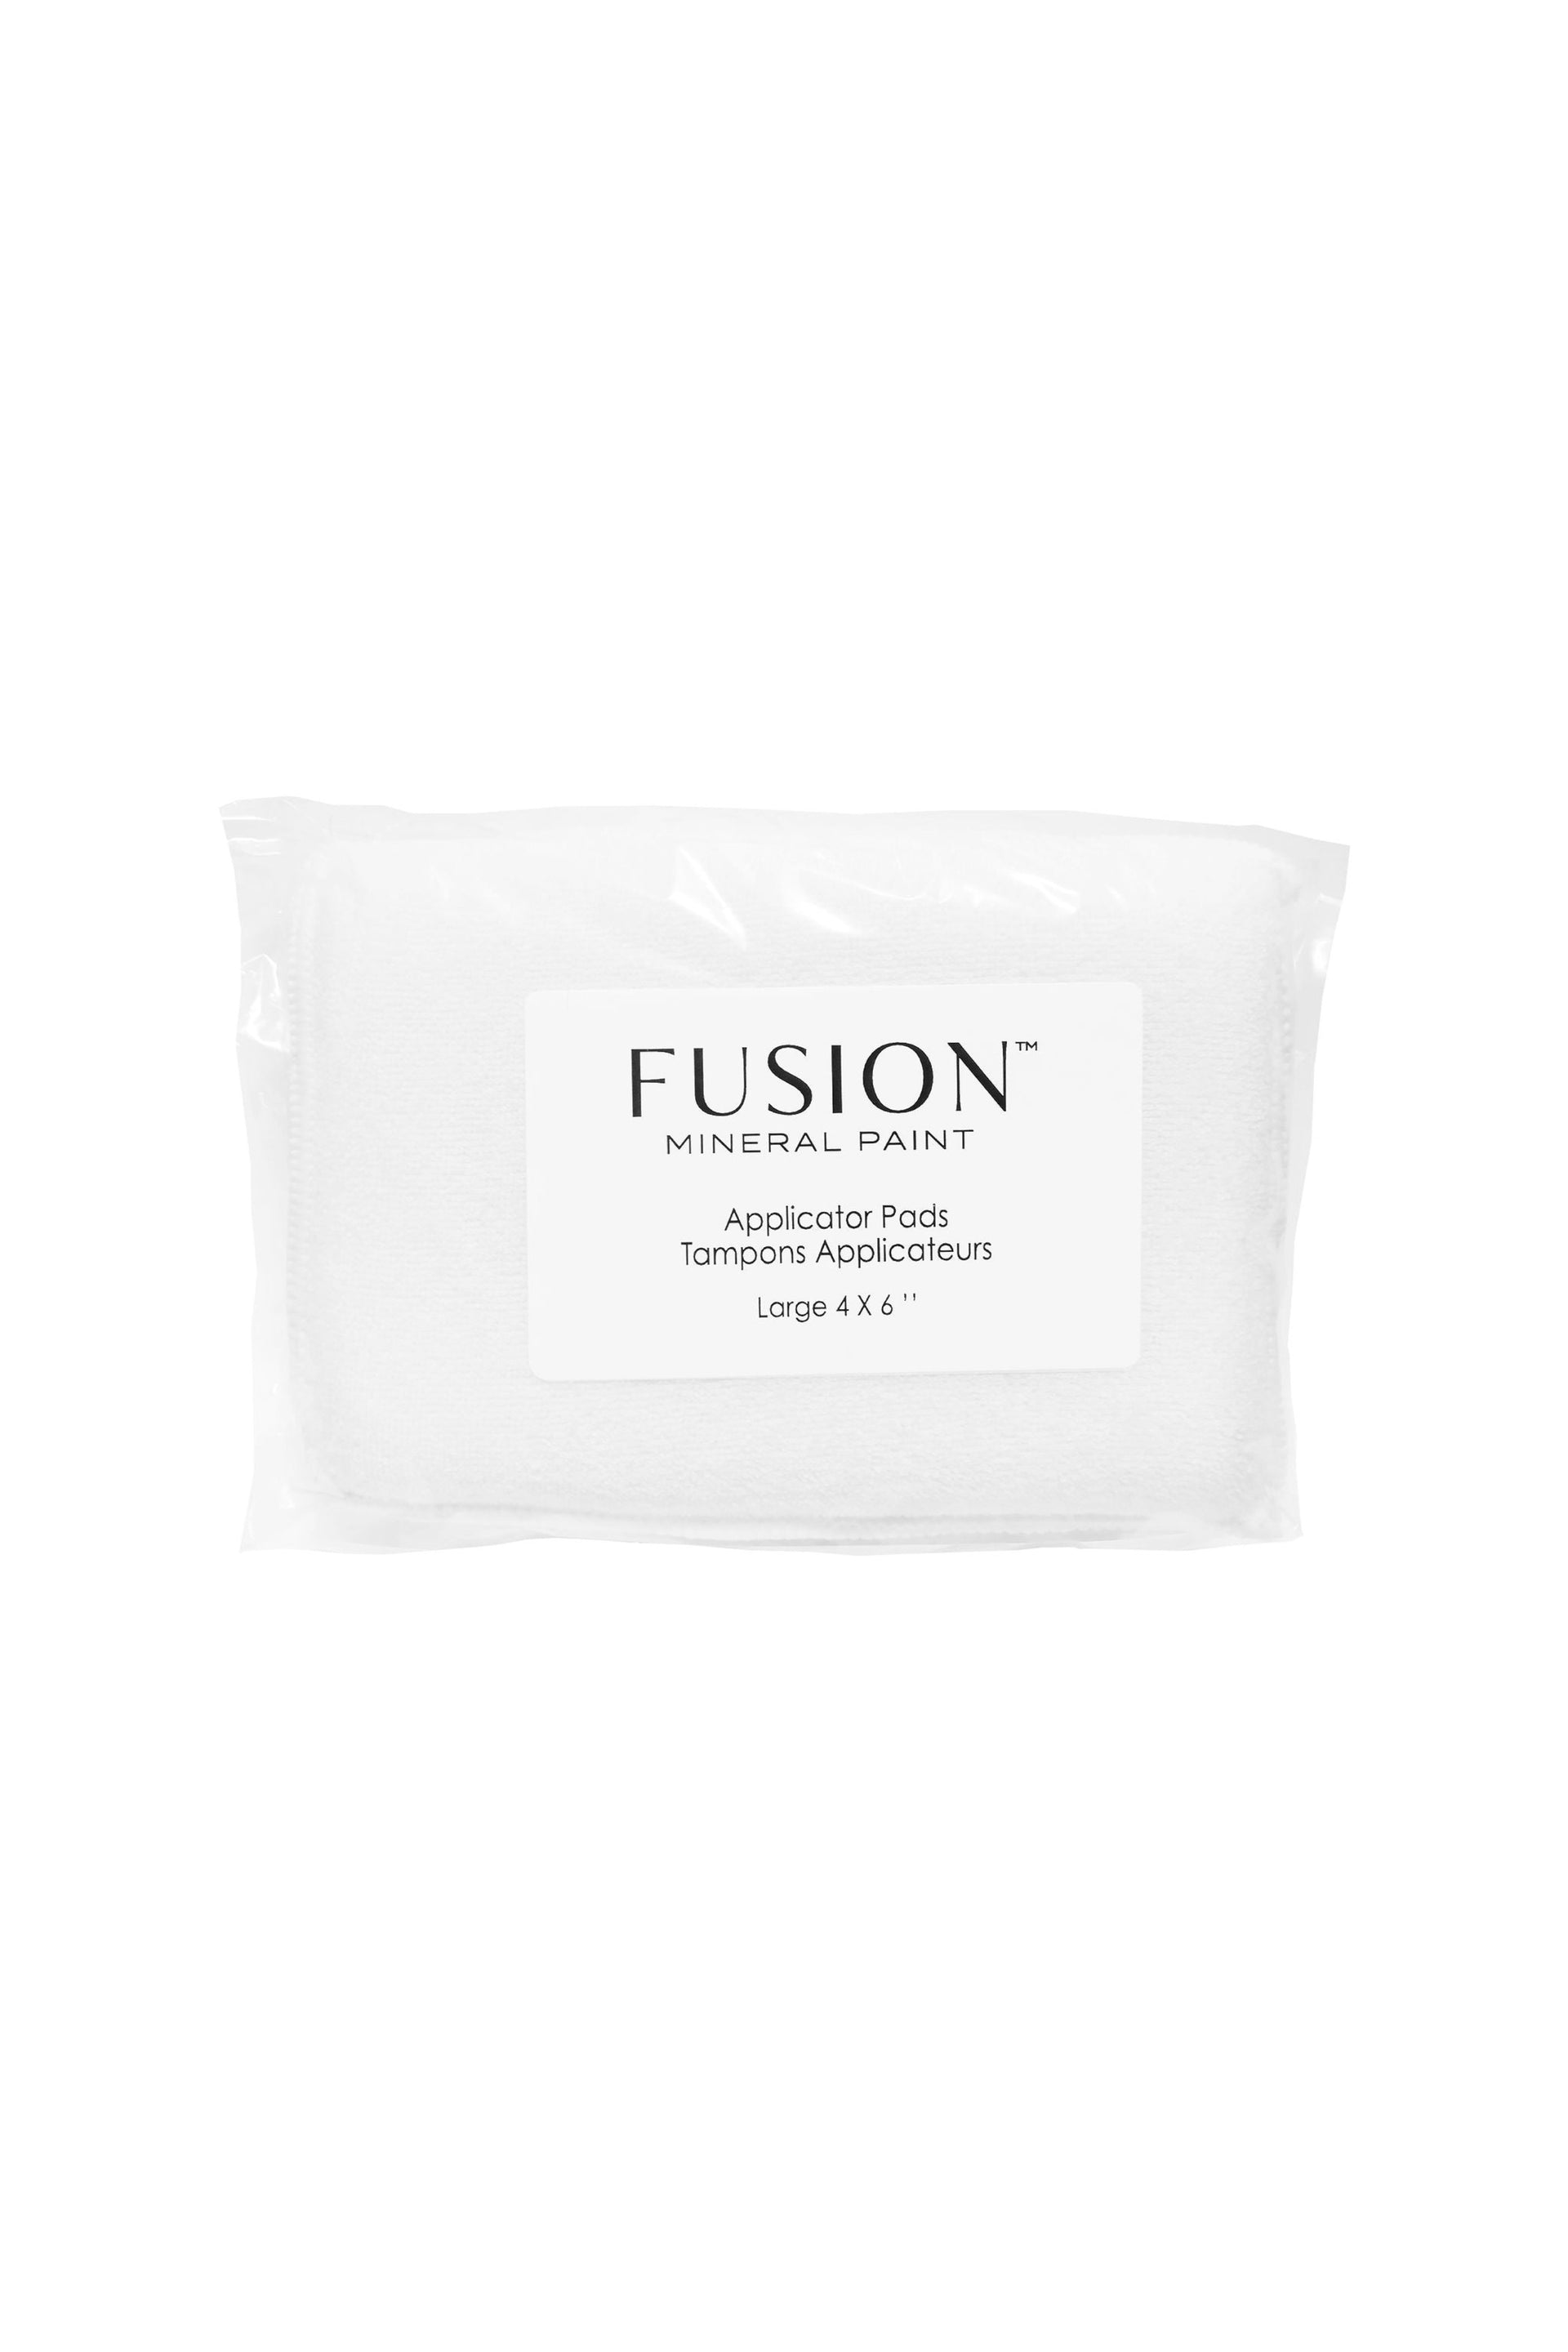 Fusion Applicator Pads Two Pack - Available At Blue Star Antiques